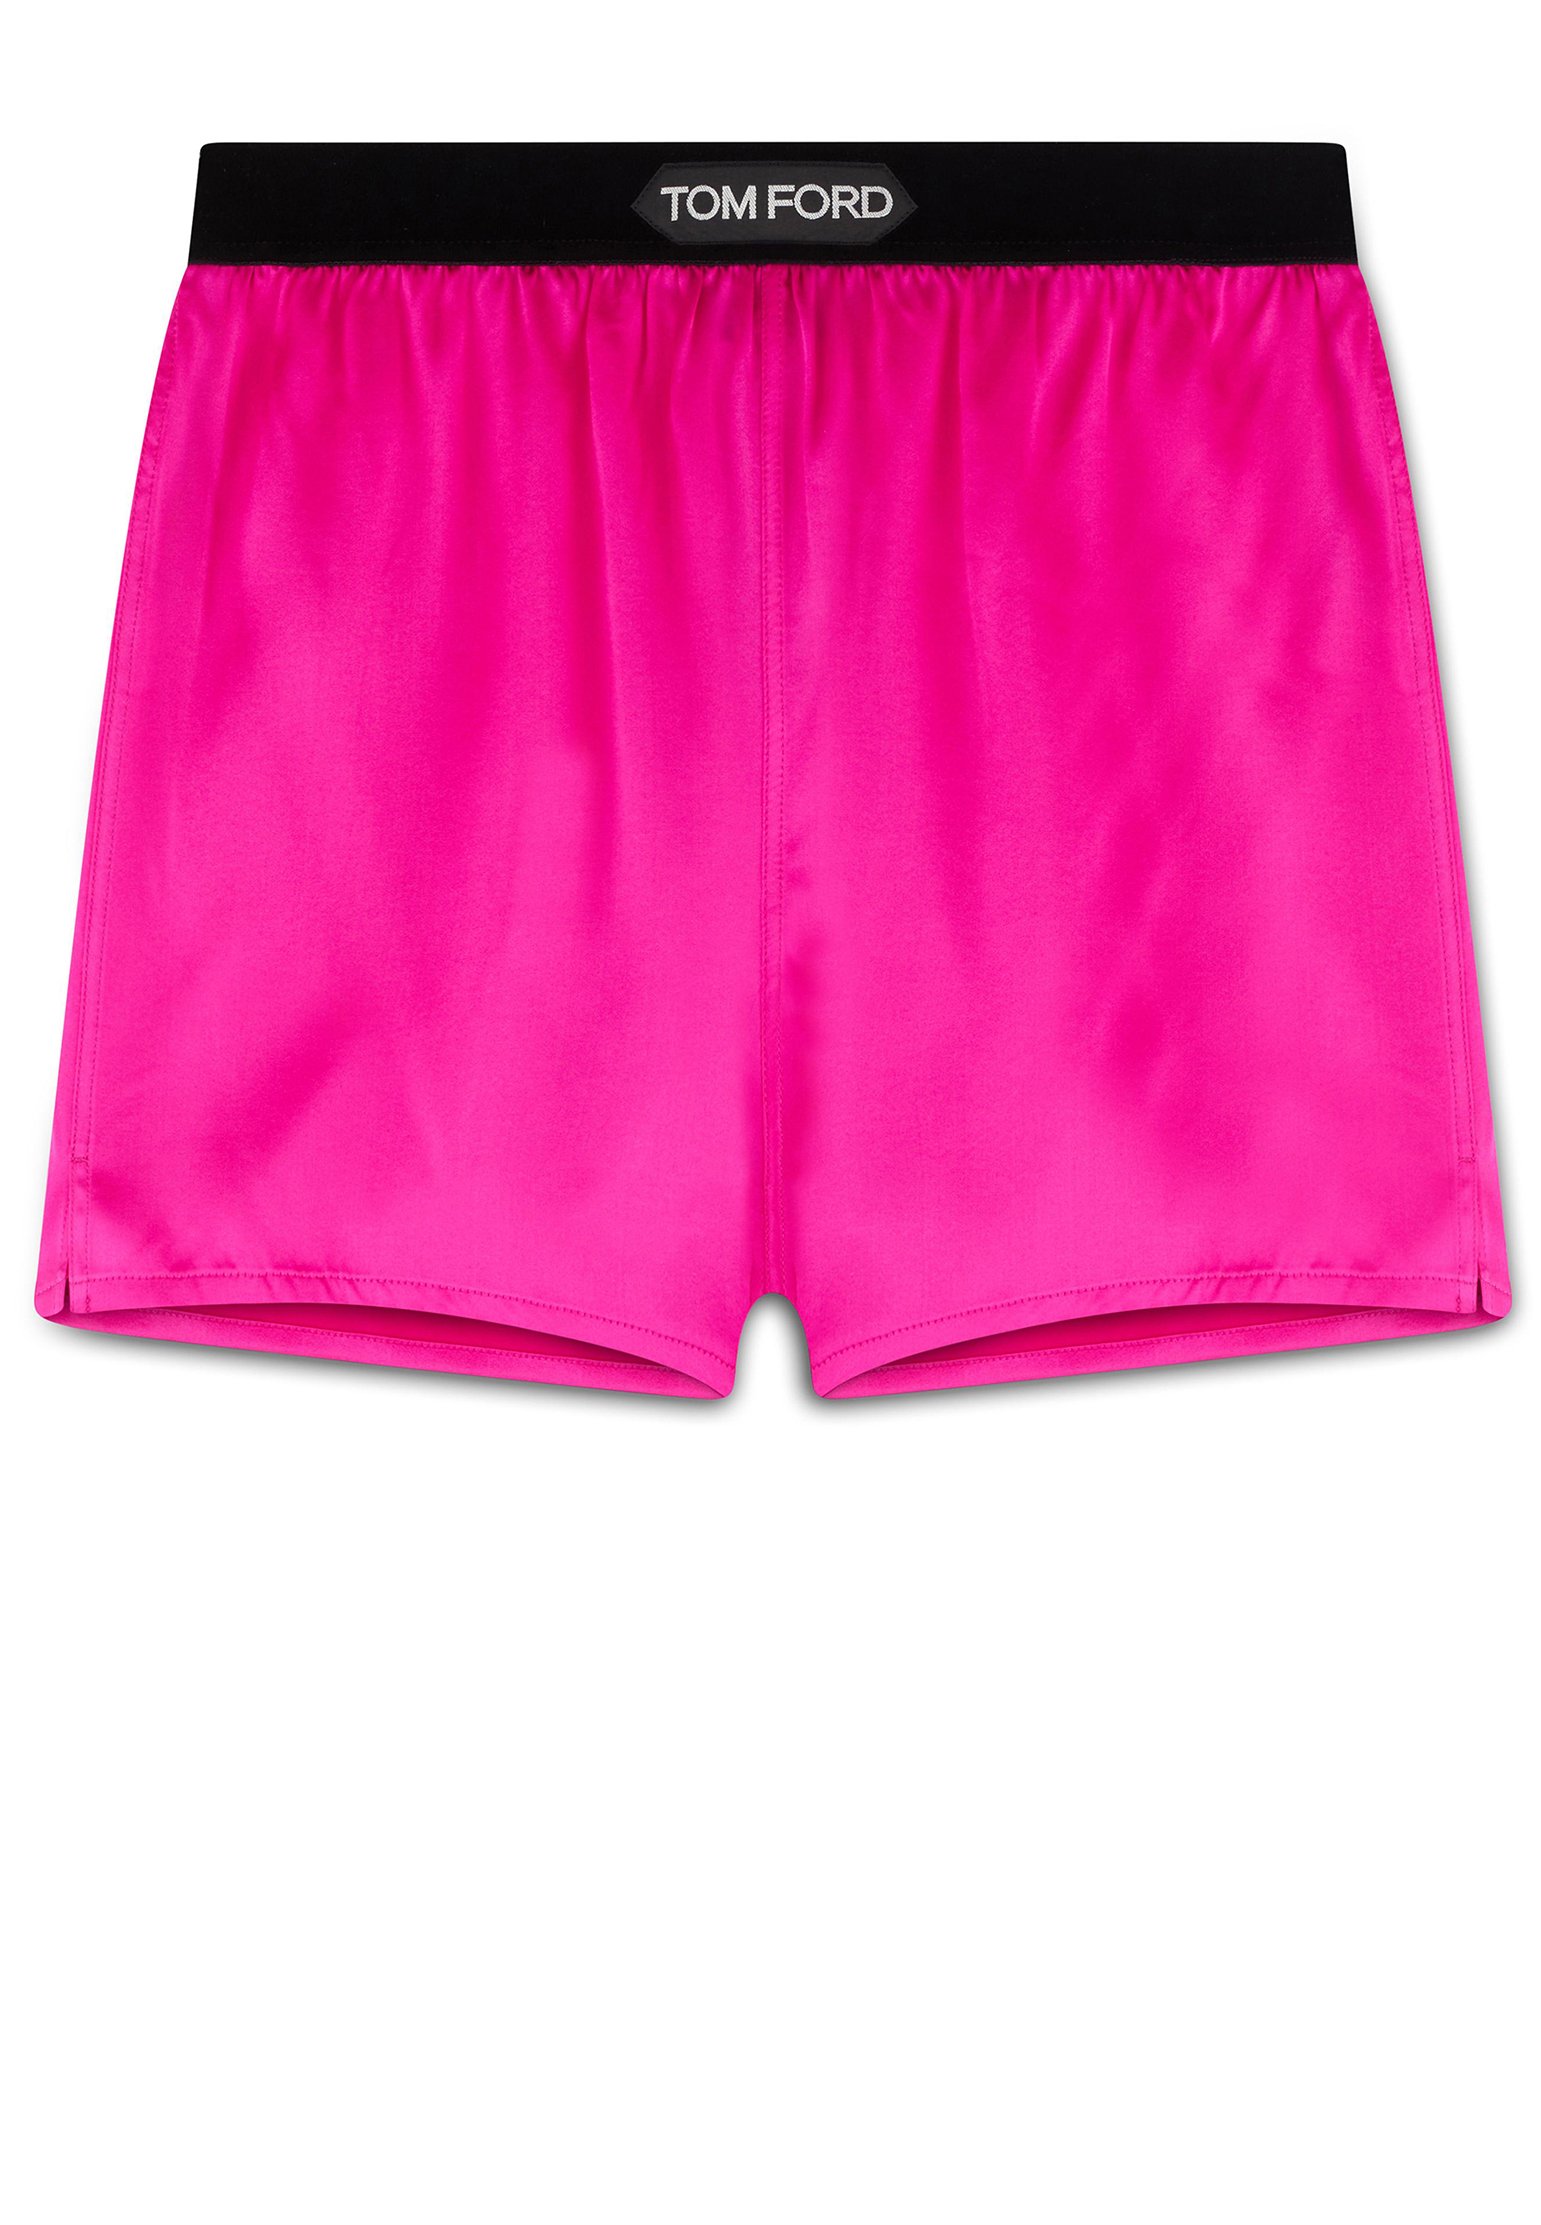 Shorts TOM FORD Color: fuchsia (Code: 570) in online store Allure